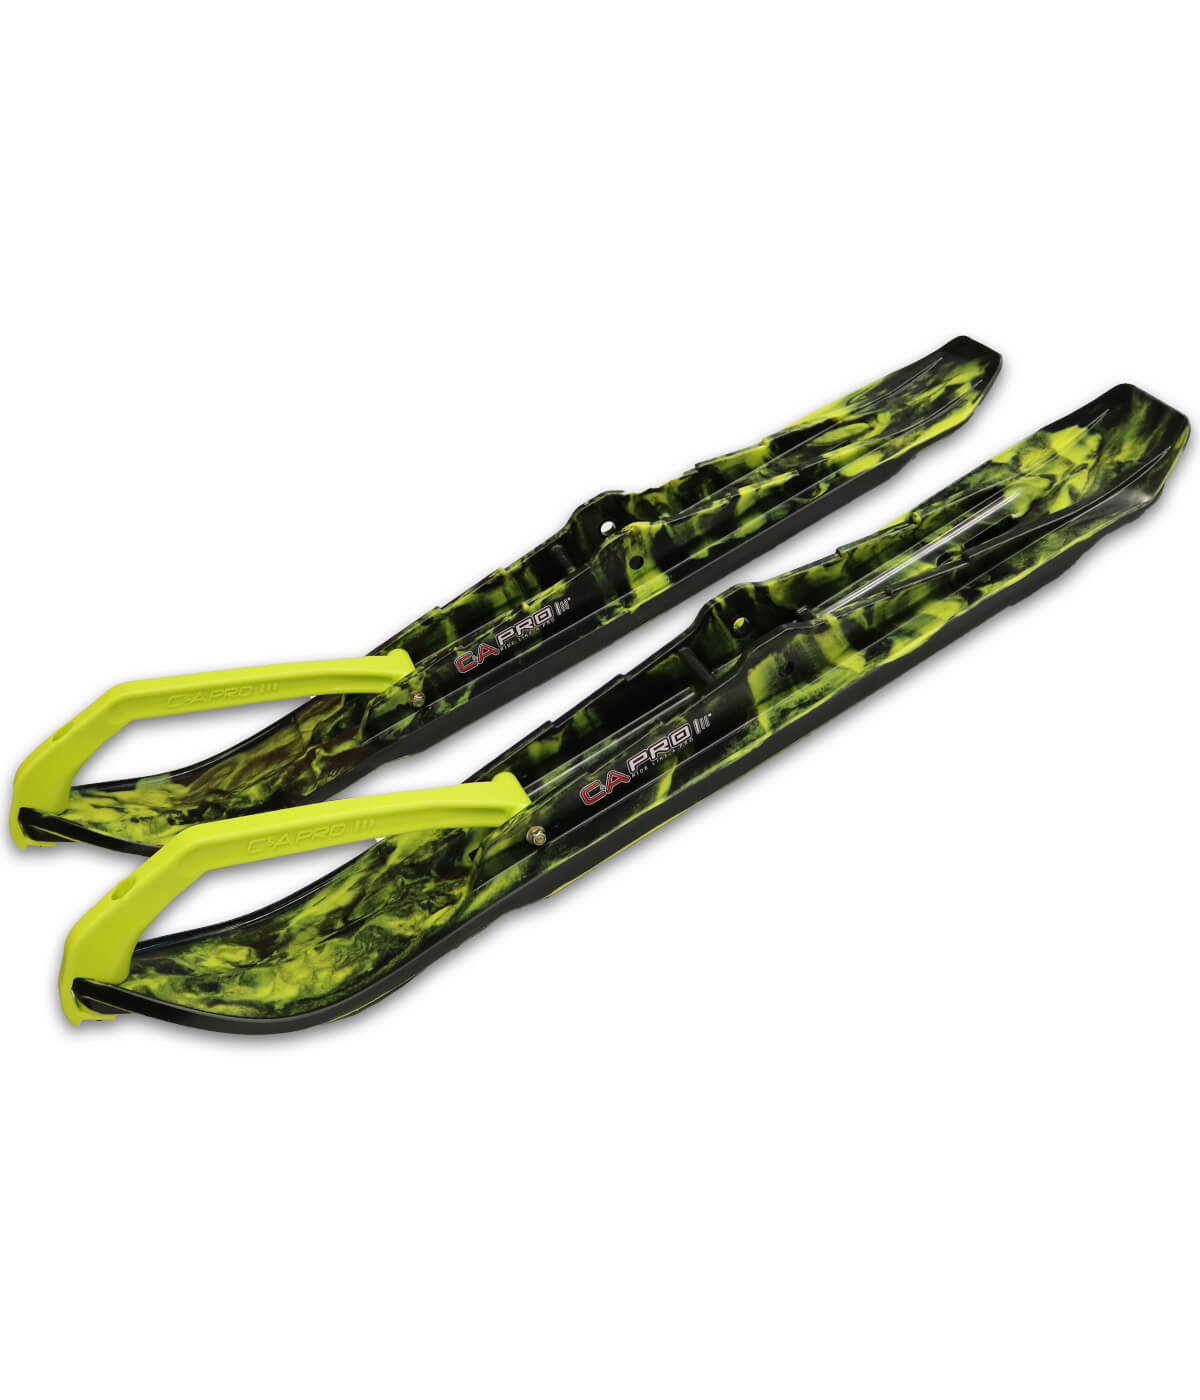 Black XCS ski with Lime Squeeze accent and Lime Squeeze handles